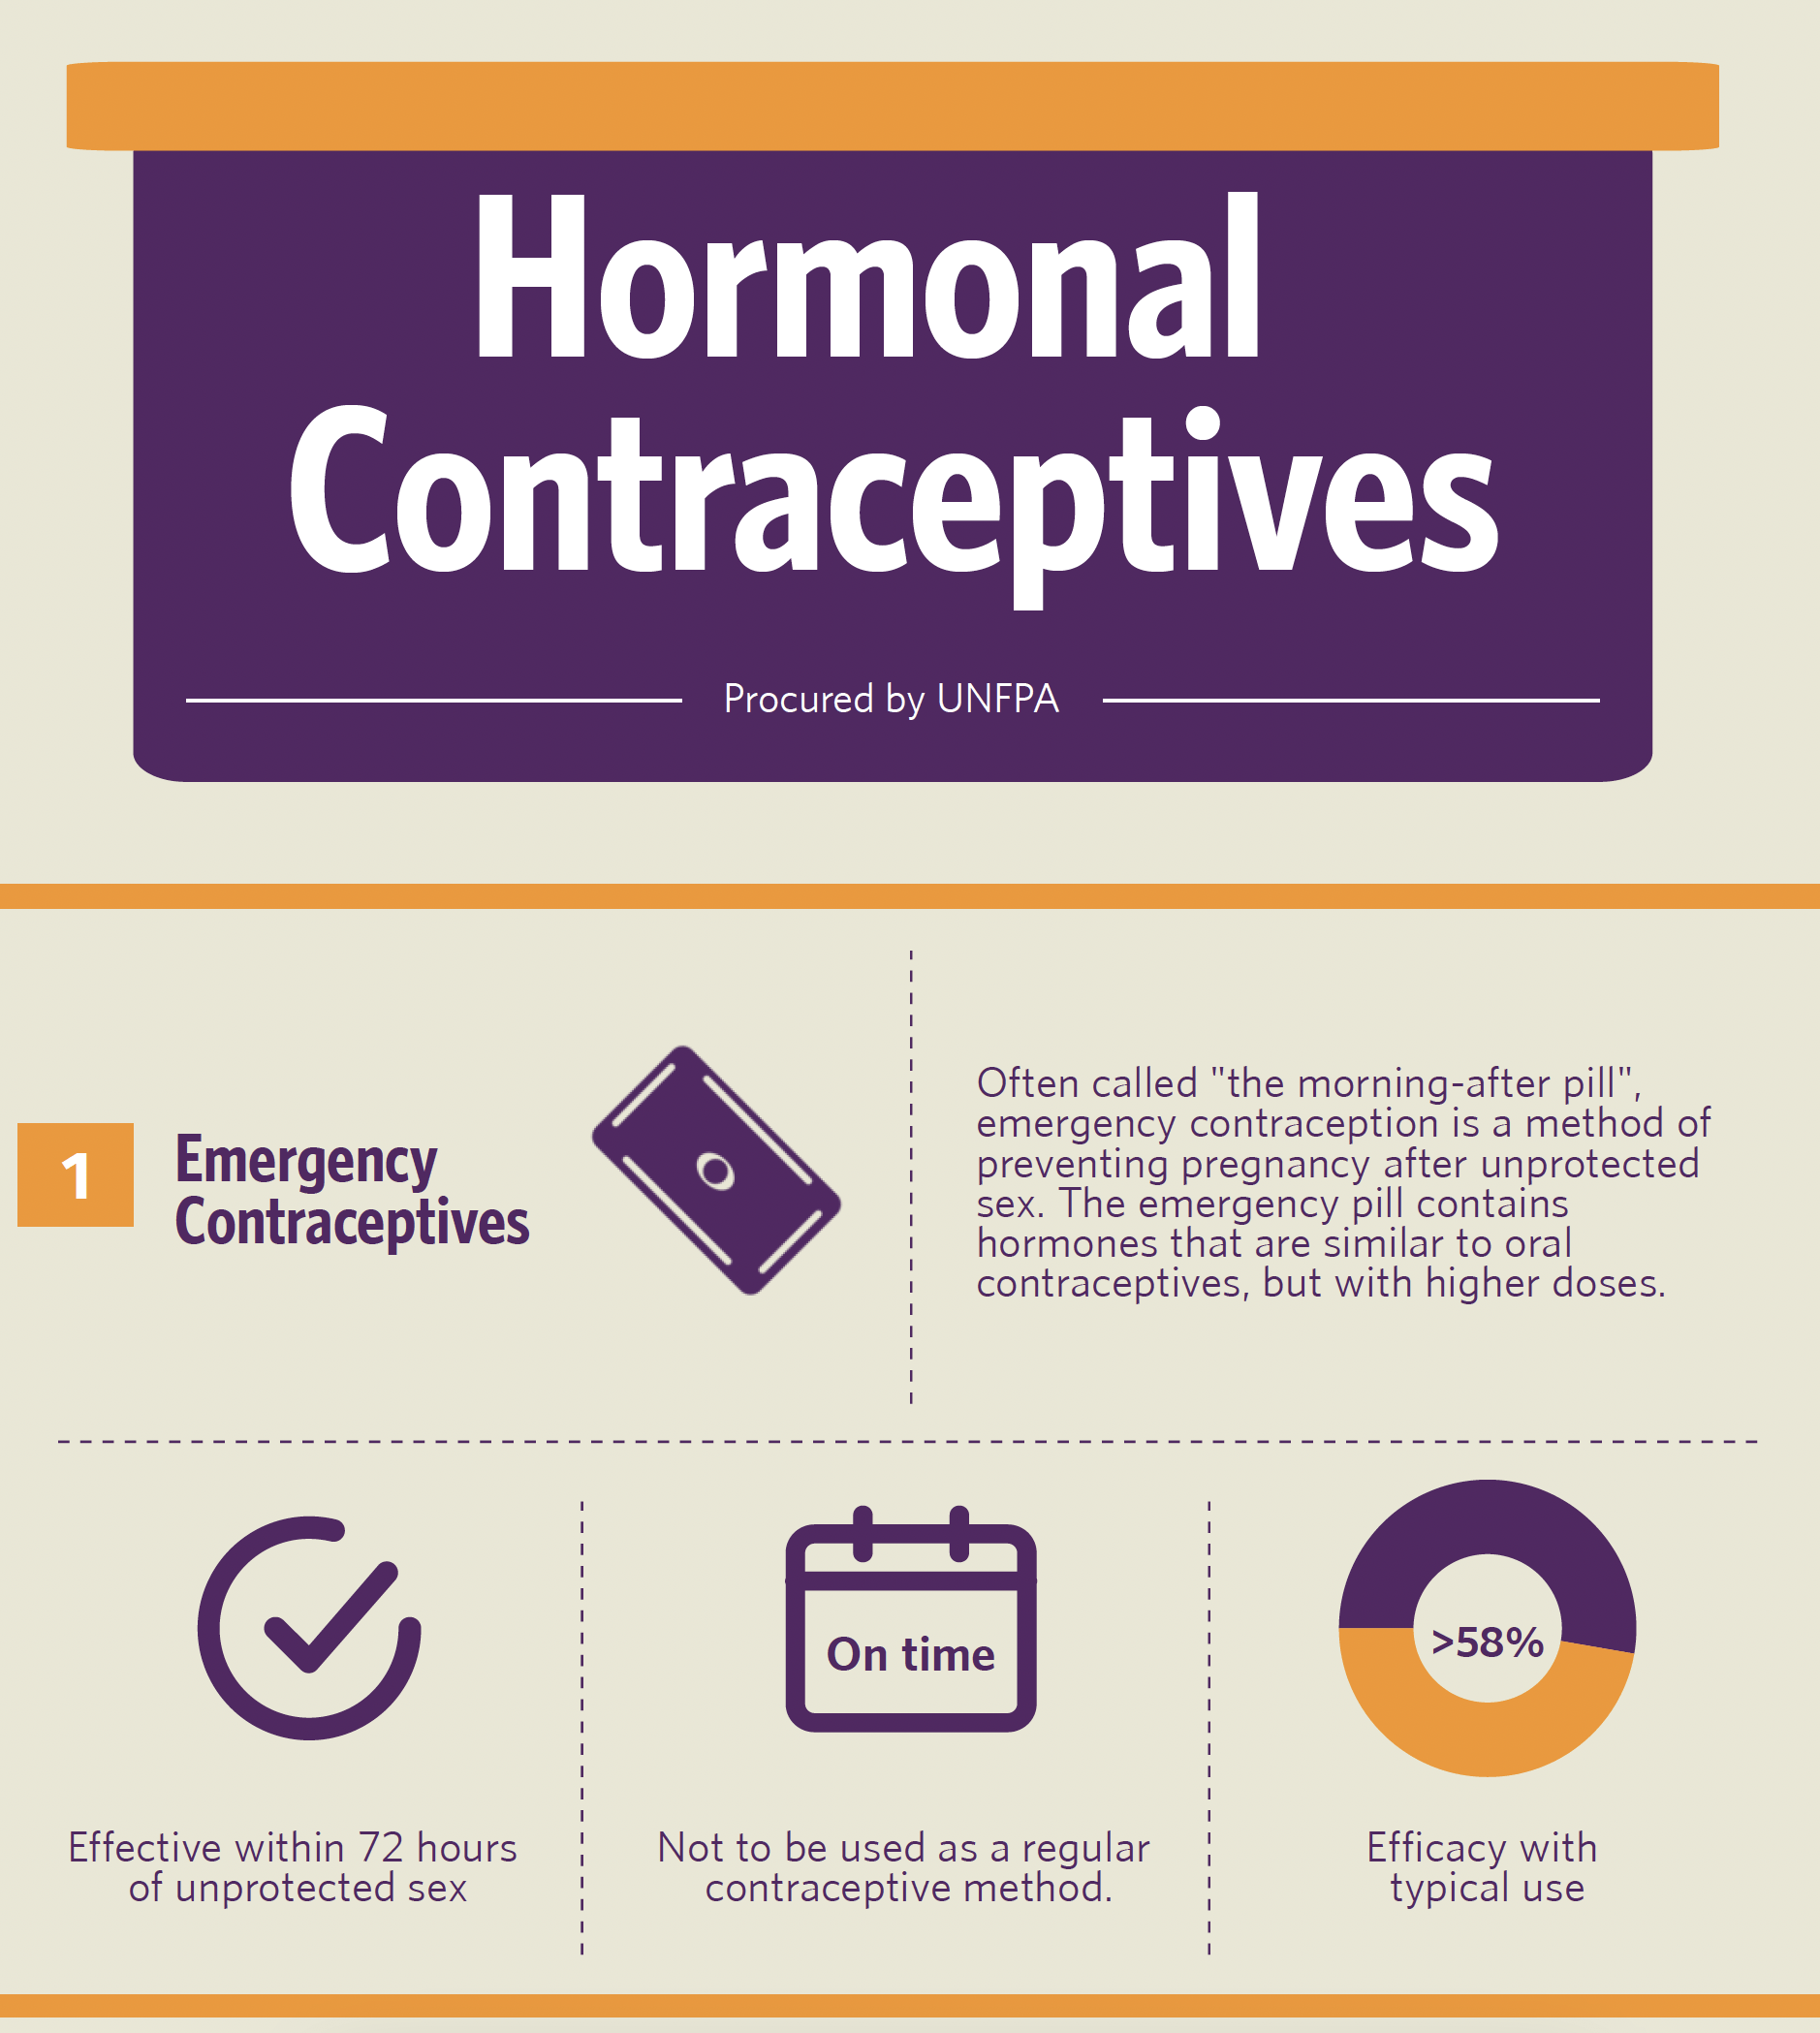 Hormonal contraceptives procured by UNFPA